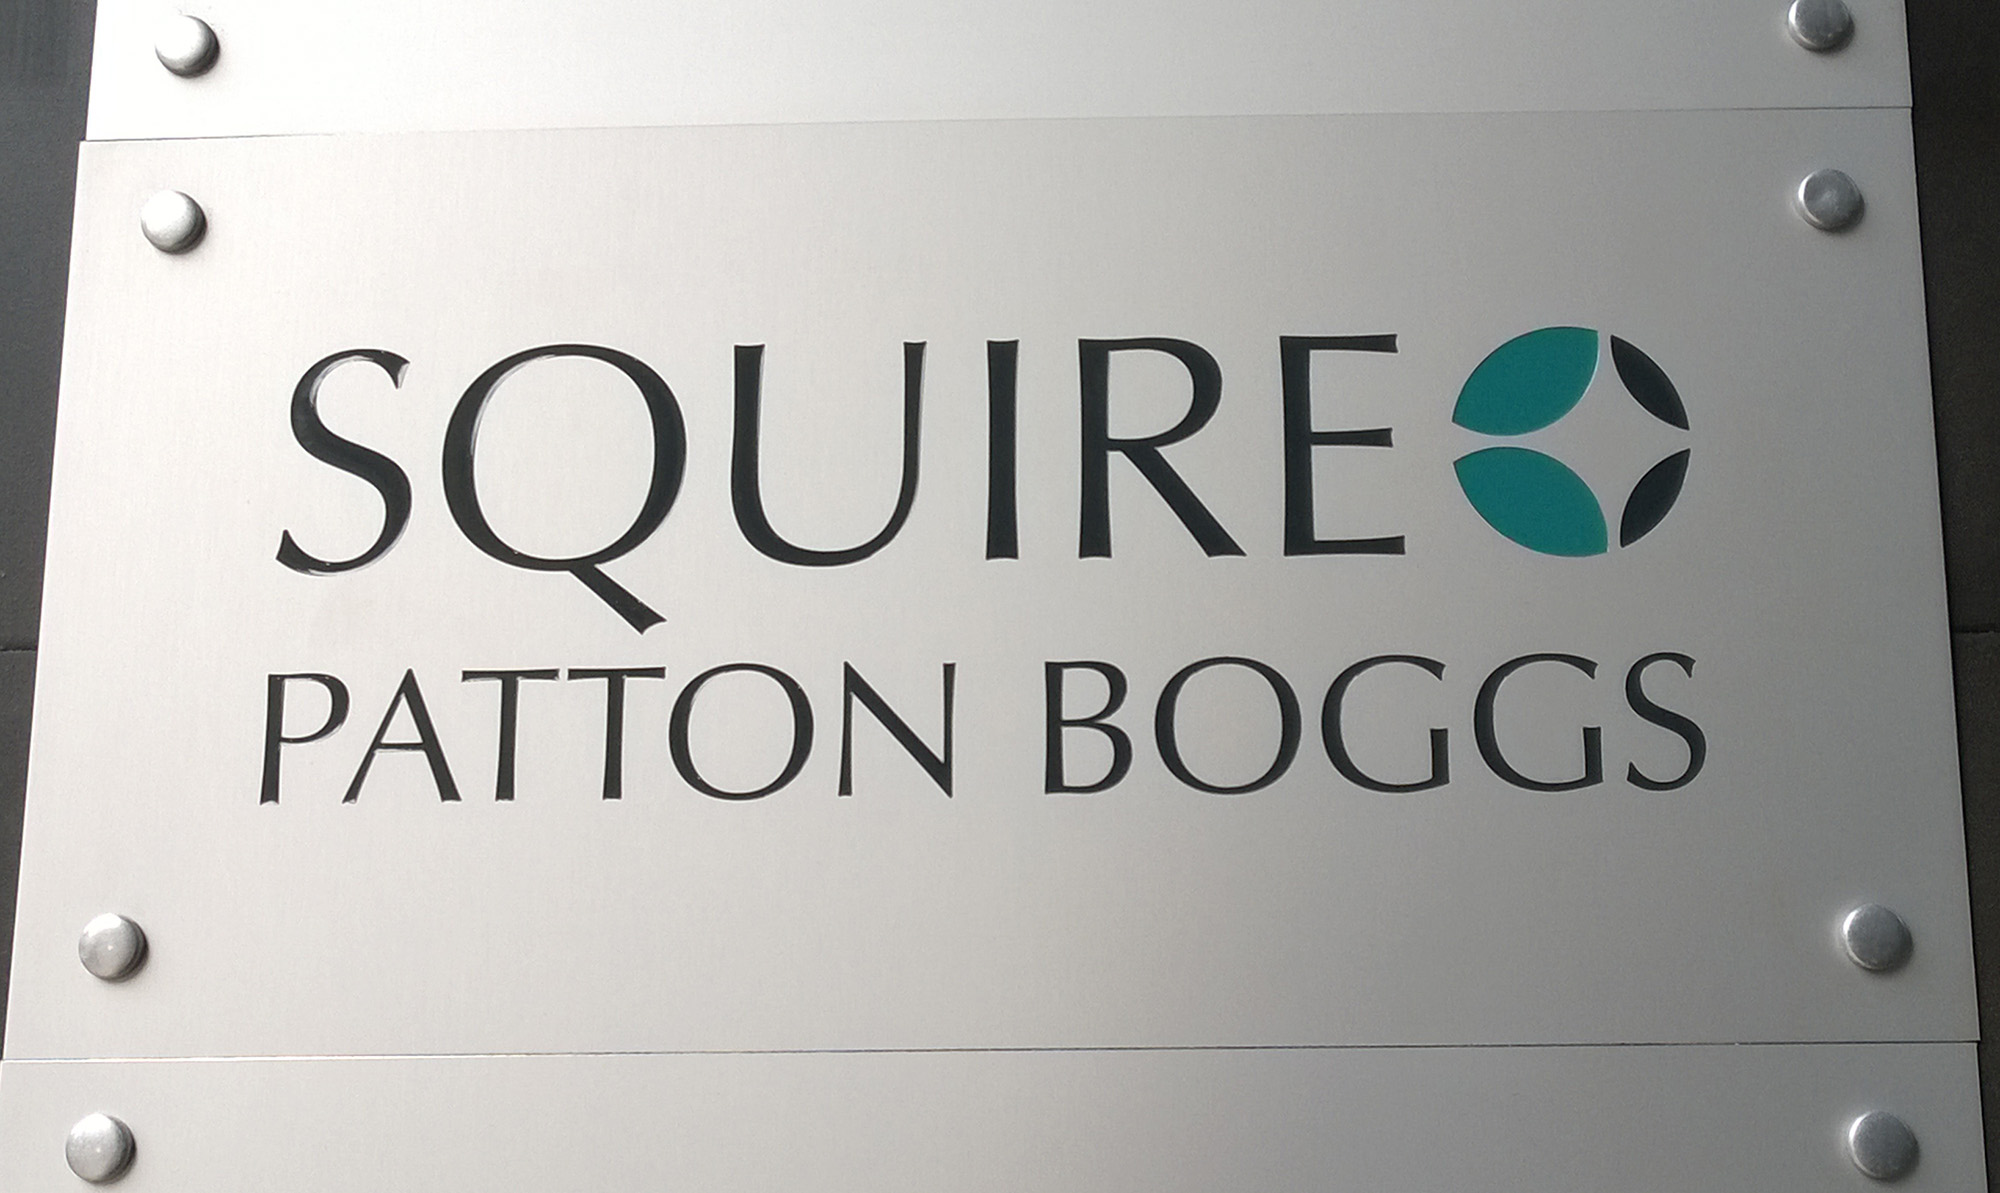 Squire Patton Boggs to launch Irish office led by Dennis Agnew